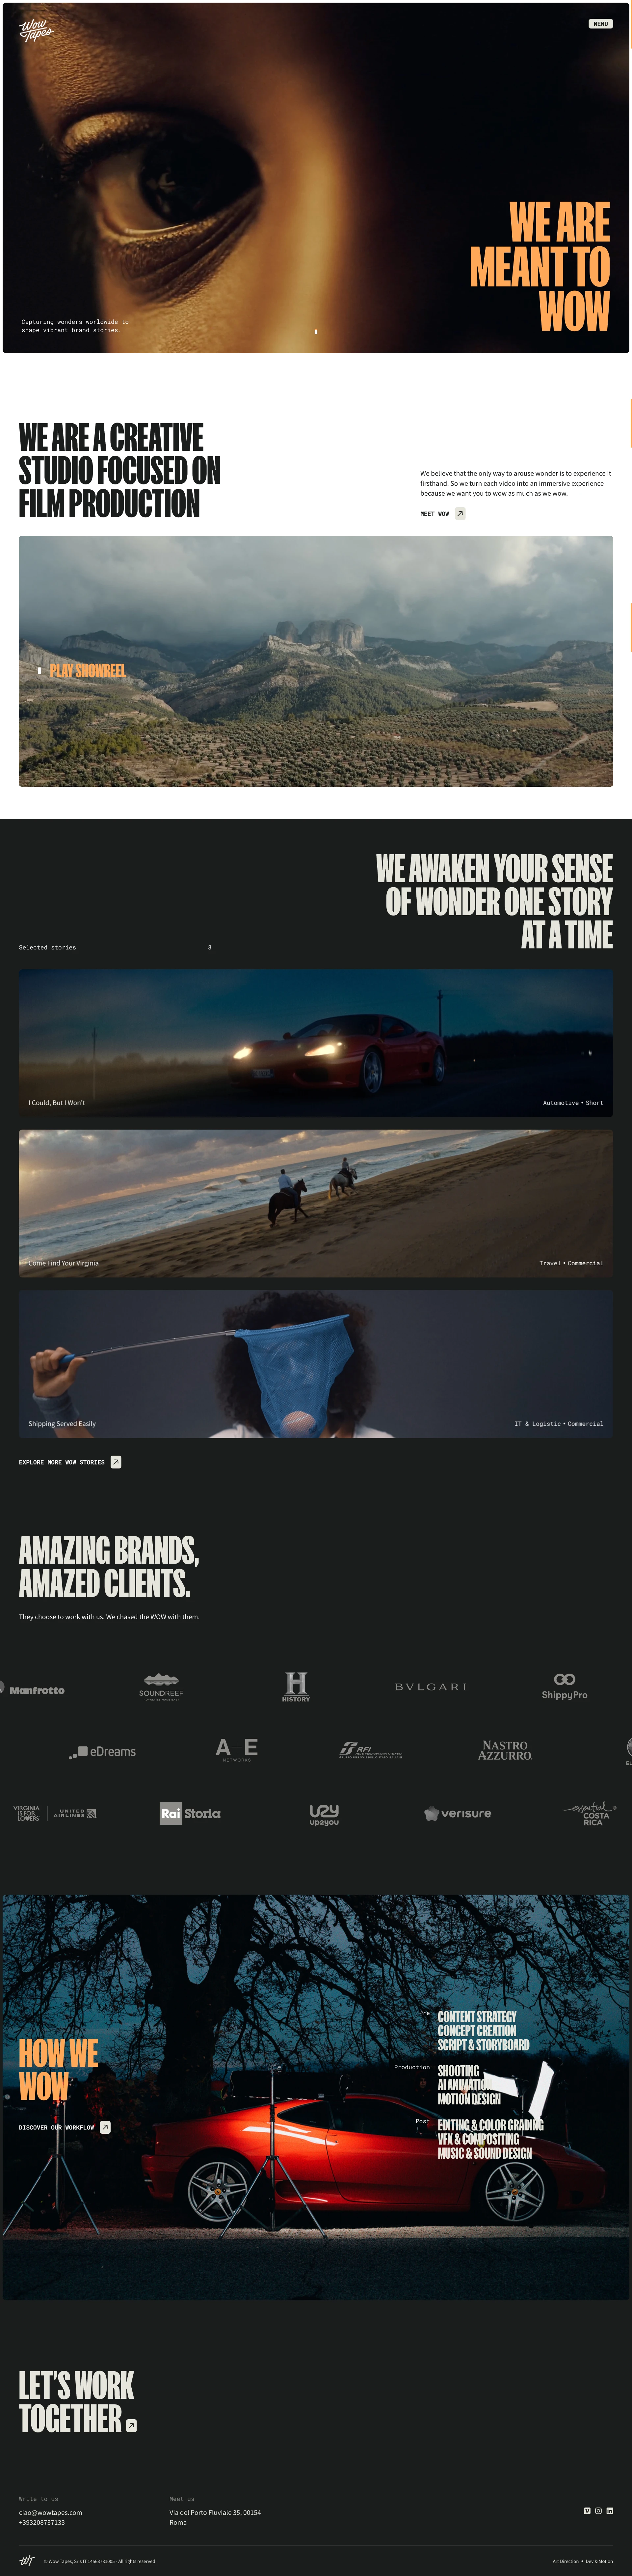 Wow Tapes Landing Page Example: Wow Tapes is an award winning creative studio based in Rome, focused on film production. We craft jaw-dropping stories for brands that aim to impress their audience. Tell us about your project and let’s wow together.